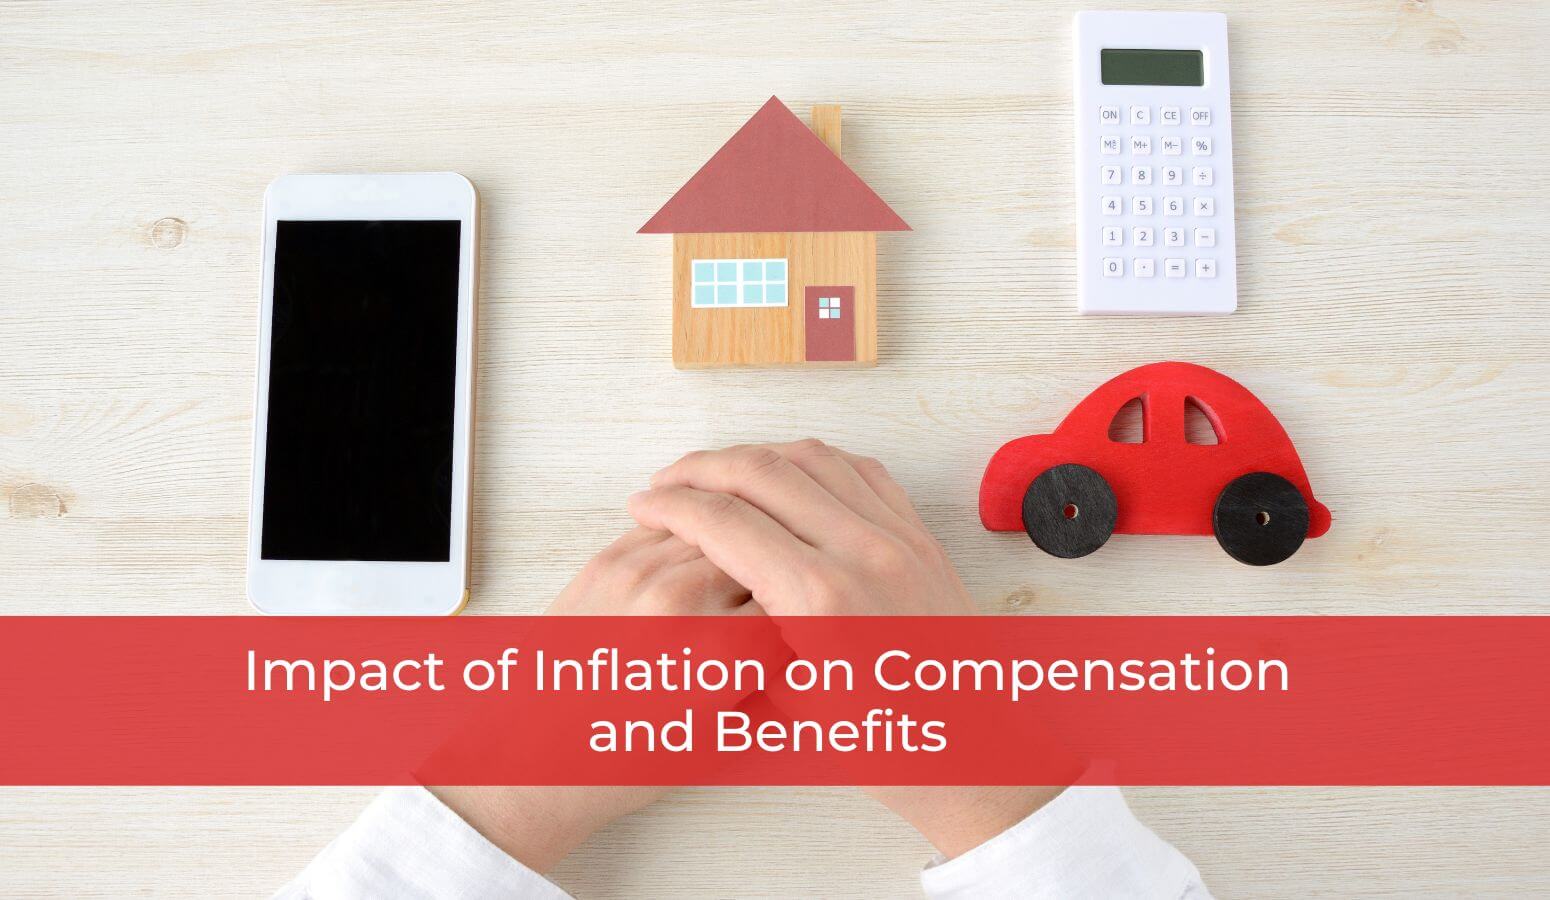 Impact of inflation on compensation